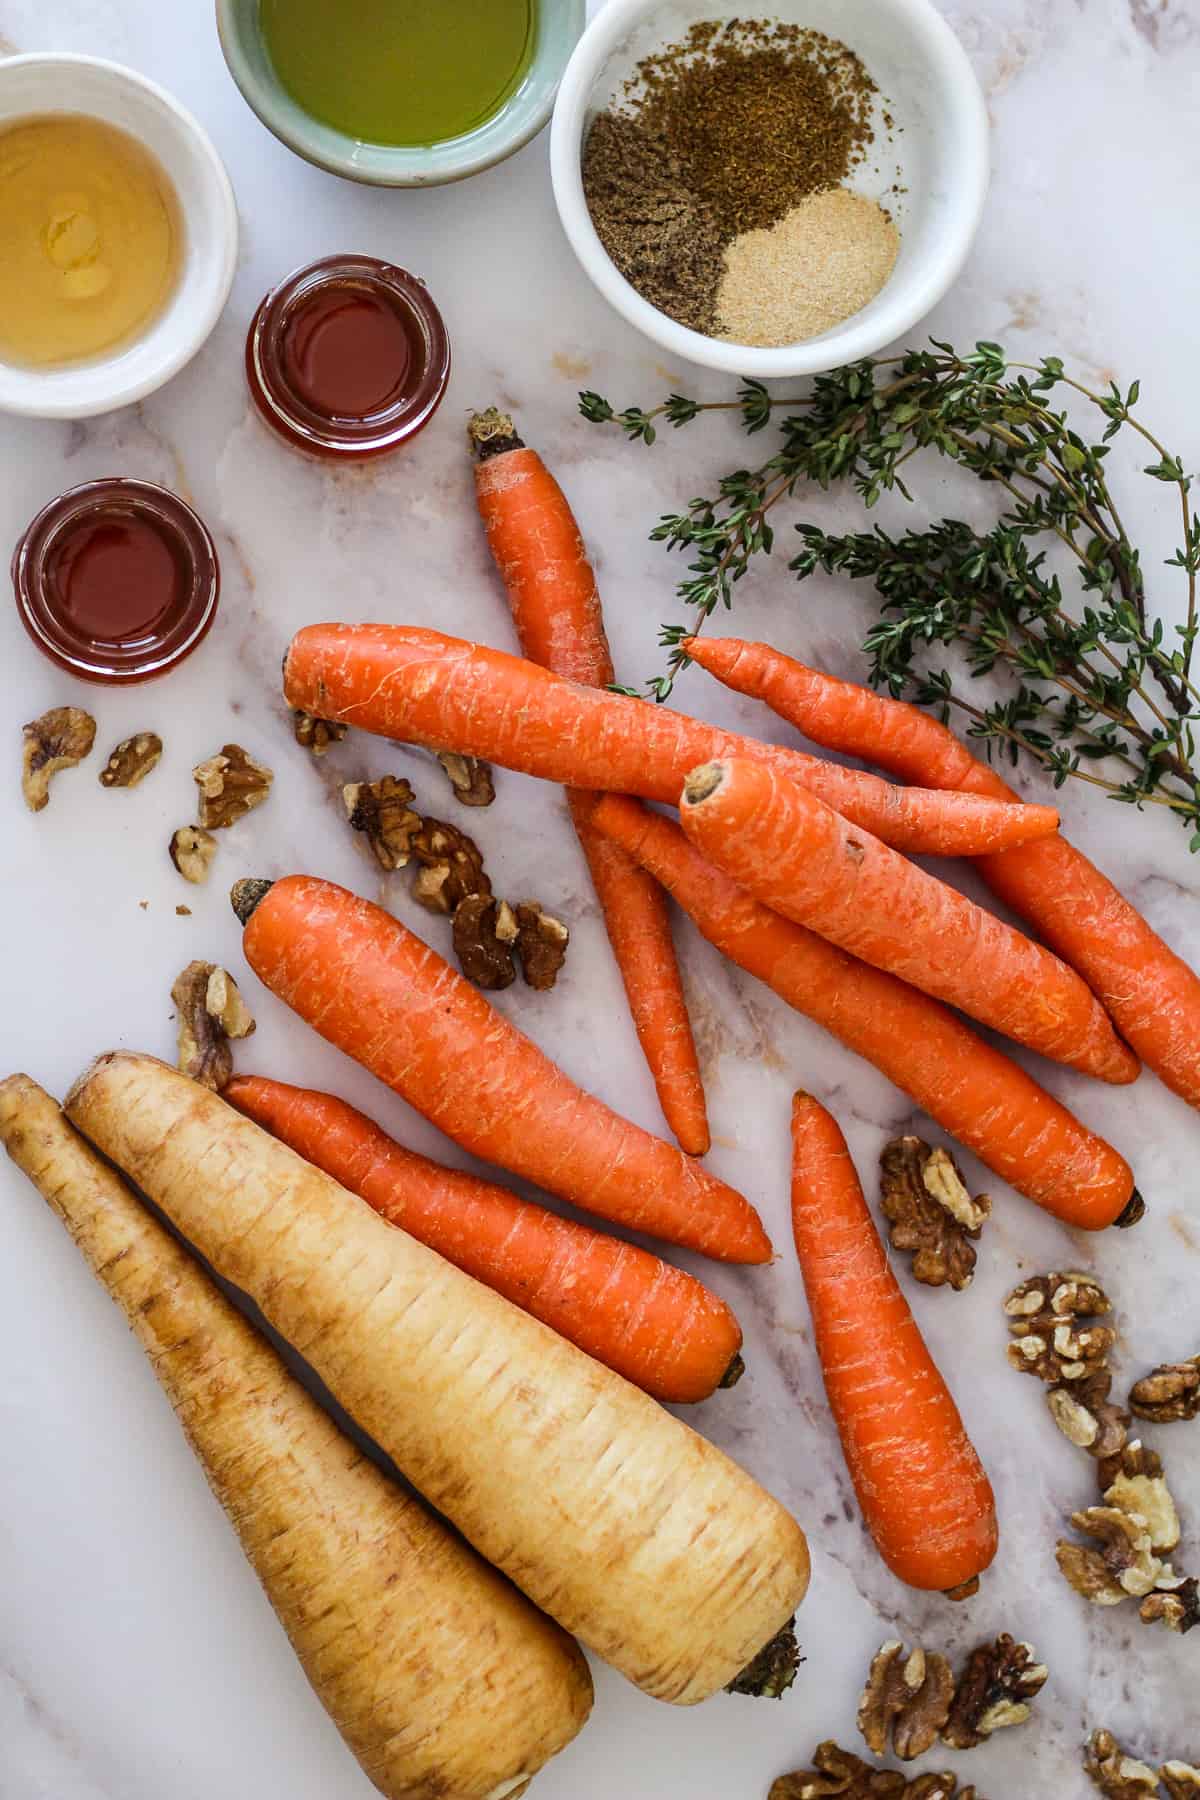 Parsnips, carrots, honey, walnuts, fresh thyme, and dry spices on white marble.